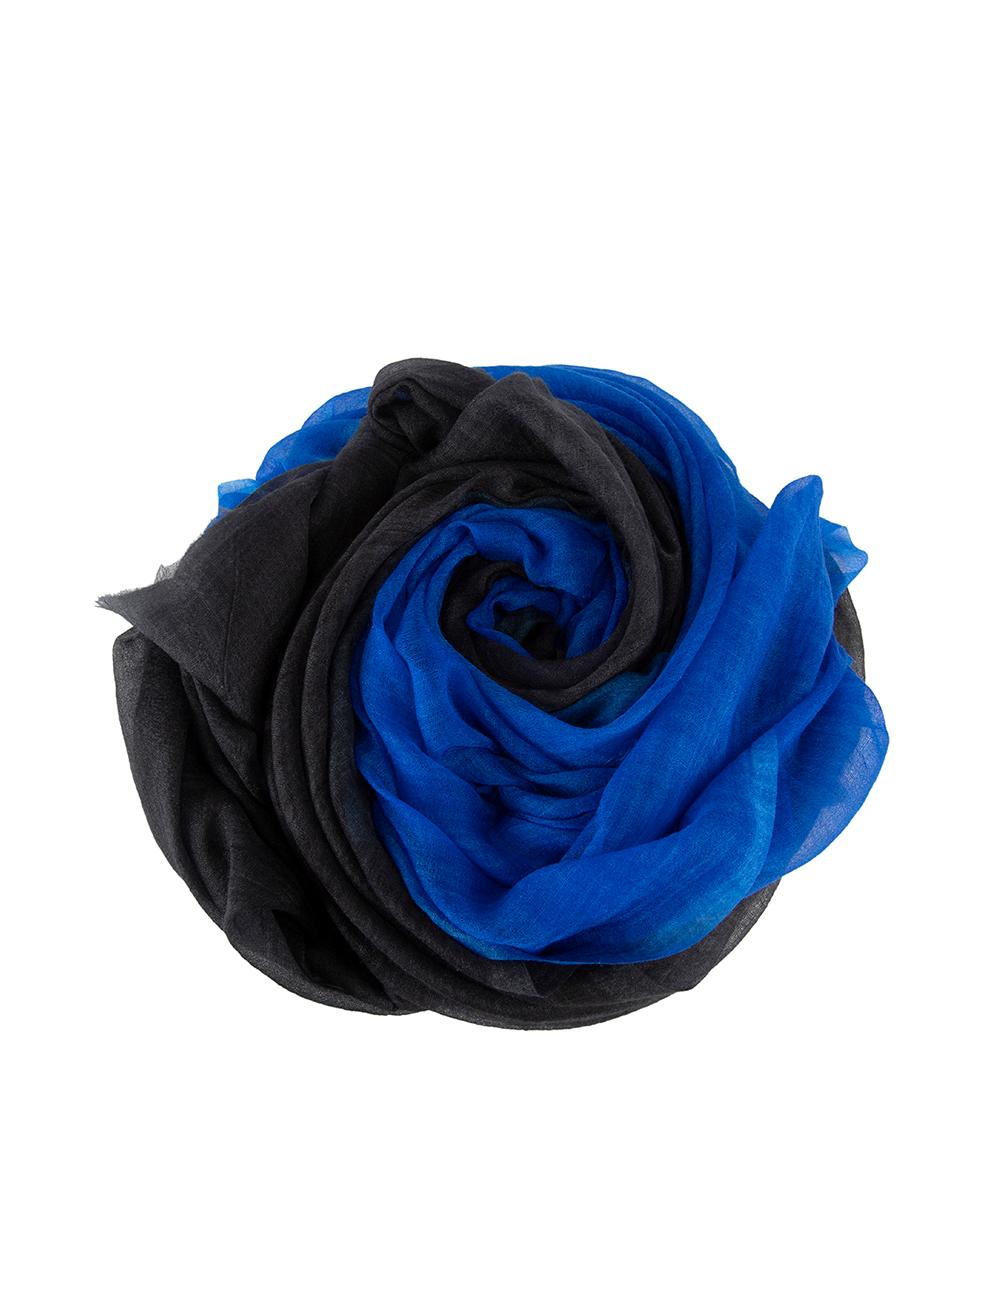 CONDITION is Very good. Minimal wear to scarf is evident. Minimal wear to the weave of the scarf with ladders to the cashmere on this used The Row designer resale item.
 
Details
Blue
Cashmere
Scarf
Blue and black ombr√©
Raw edge